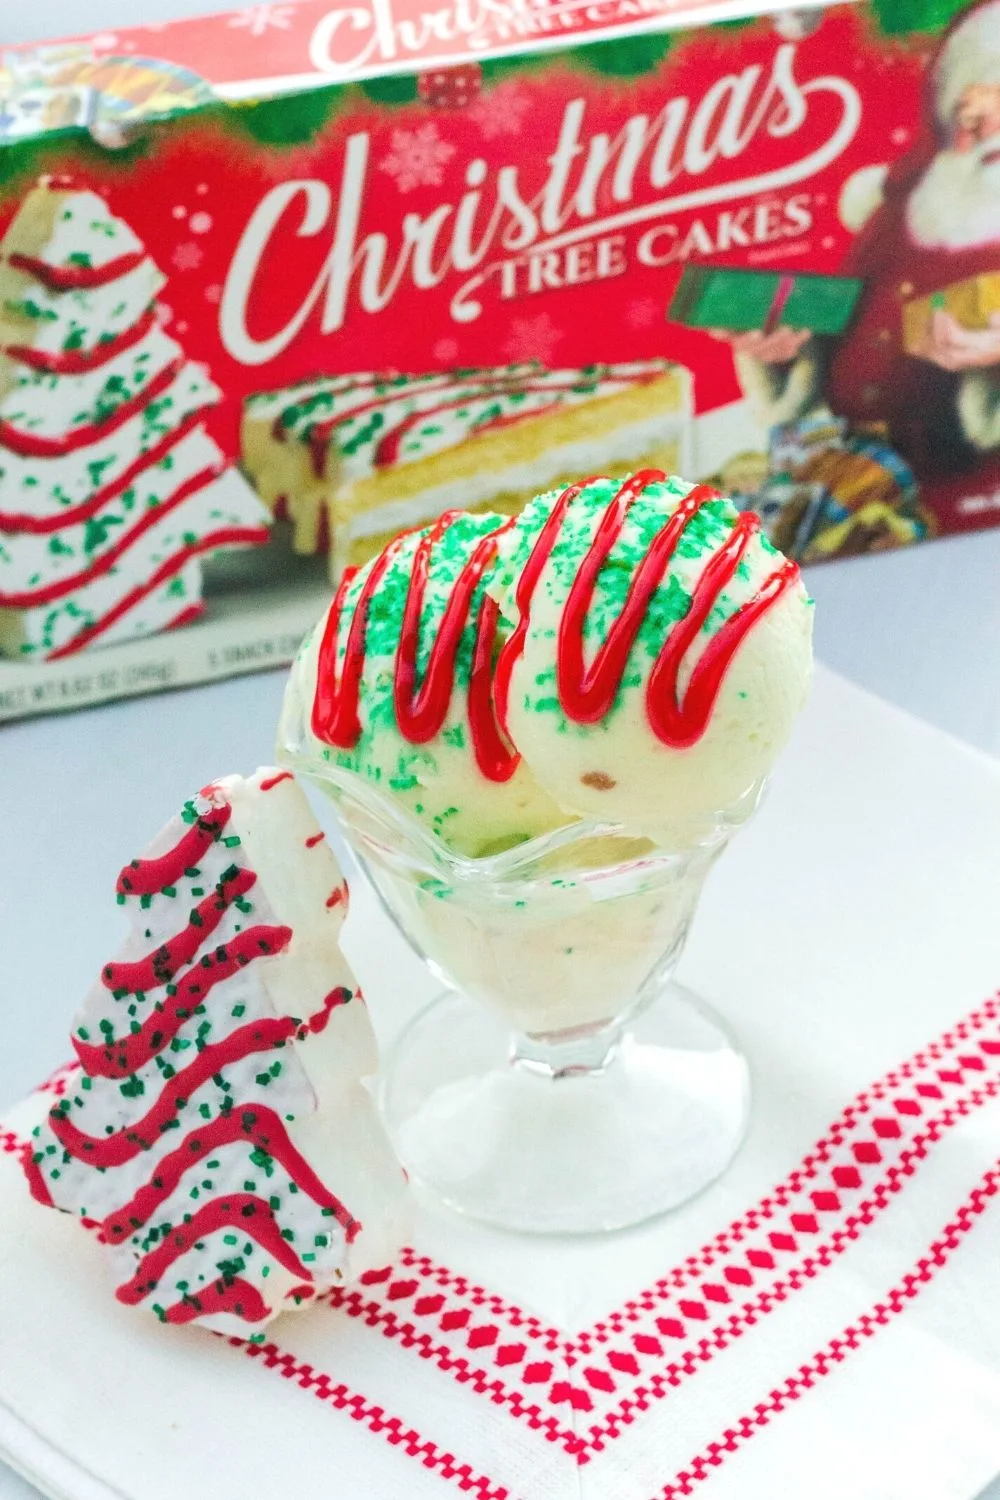 a glass dish of Christmas Tree Cake ice cream, with a Little Debbie snack cake next to it, and a box of Christmas Tree Cakes in the background.